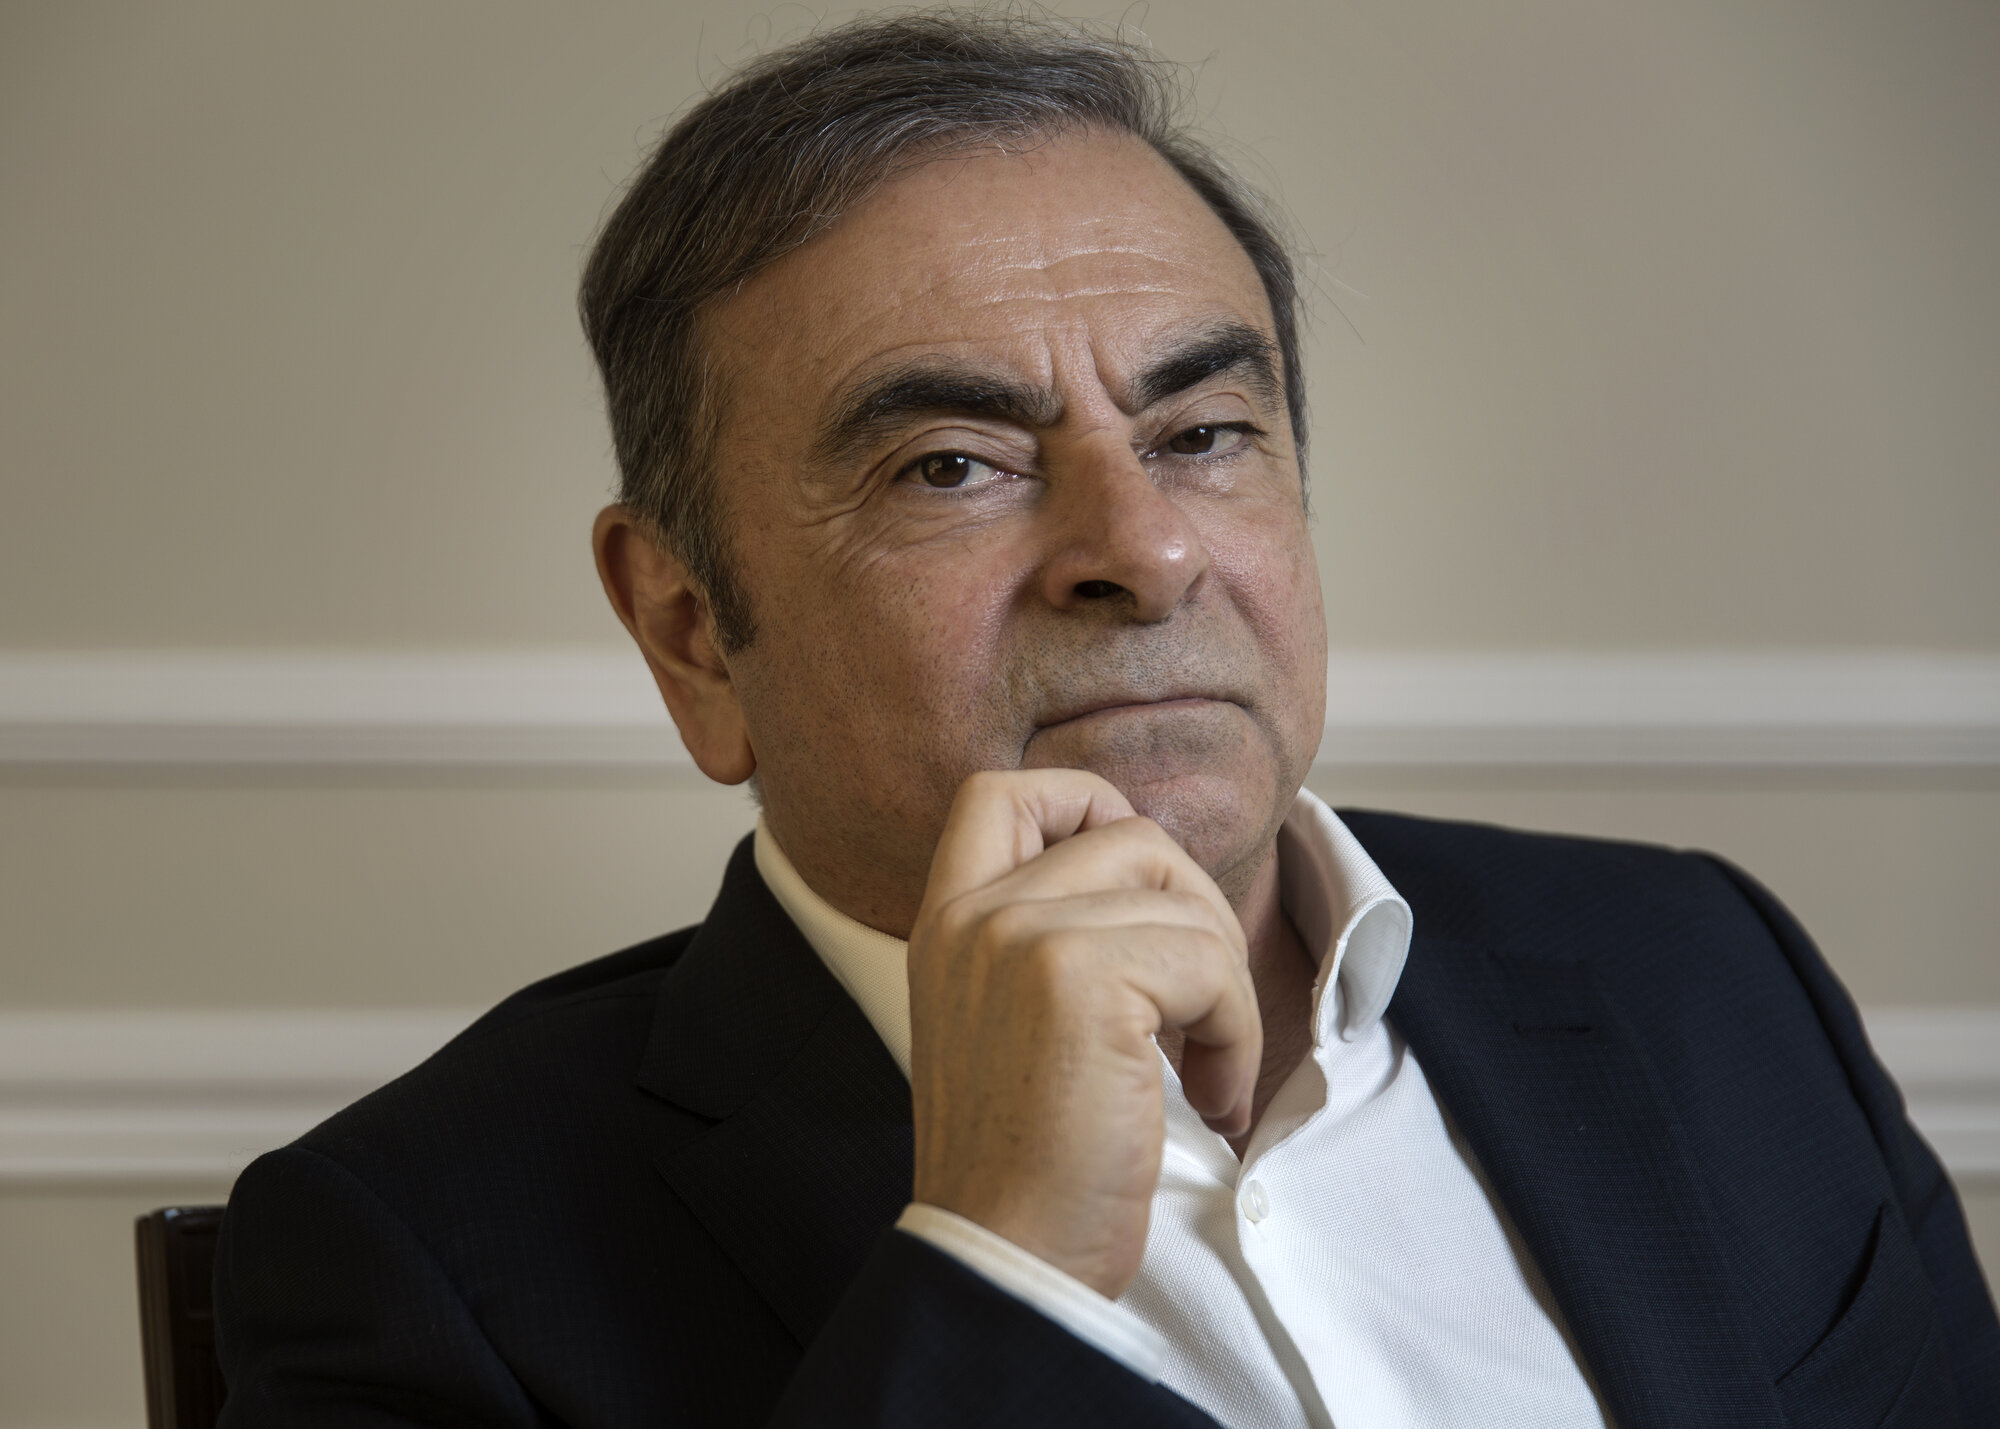  Carlos Ghosn, former chairman of Nissan and fugitive. Beirut, Lebanon. 